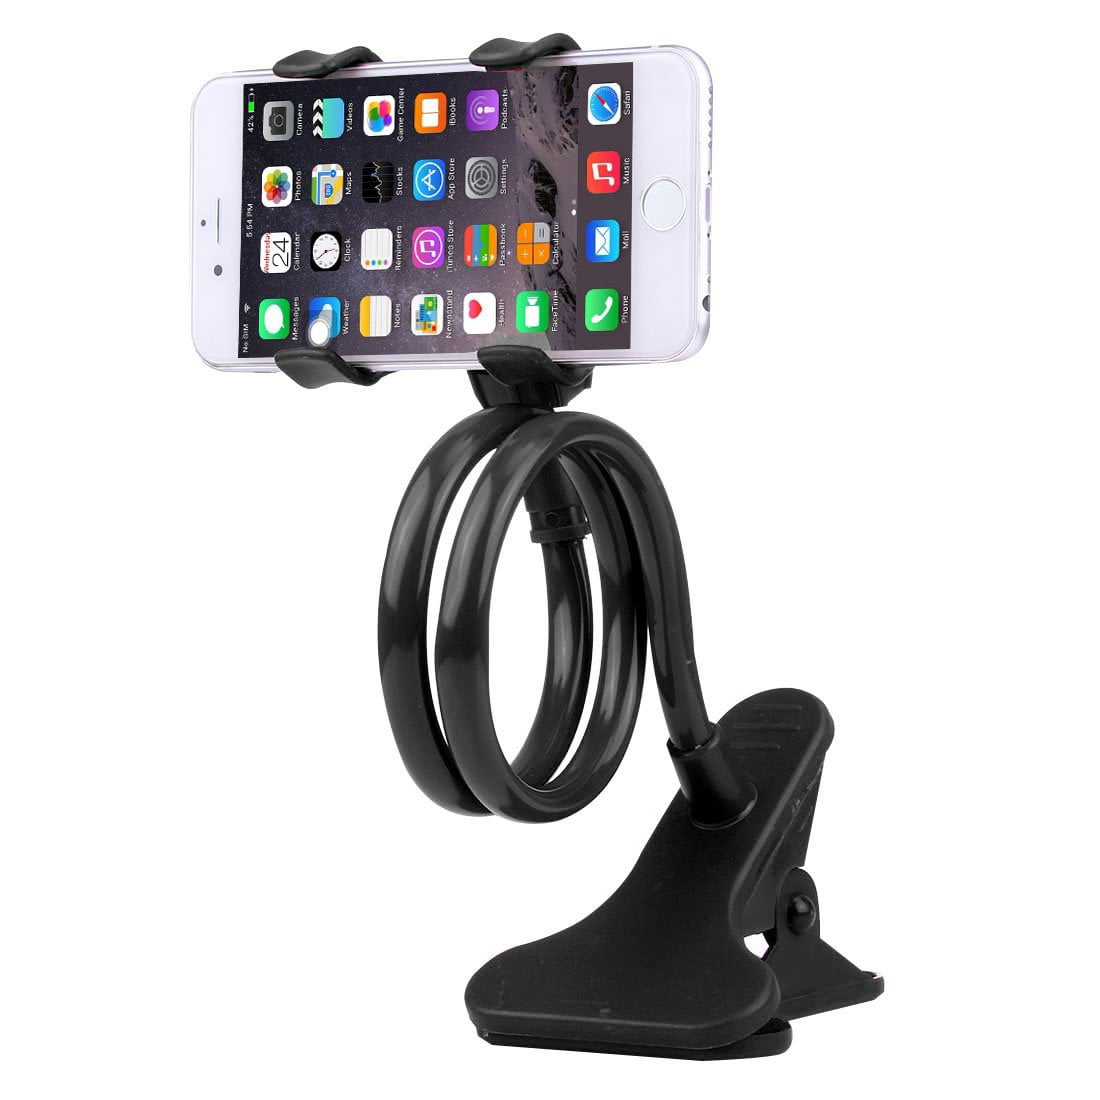 Bedside Lazy Bracket Mobile Phone Holder Universal Lazy Installation Flexible Long Arm Bracket For 4-6 Inch Mobile Phone Creative Multifunctional Dormitory Bed With TV Yougou01 Mobile Phone Holder